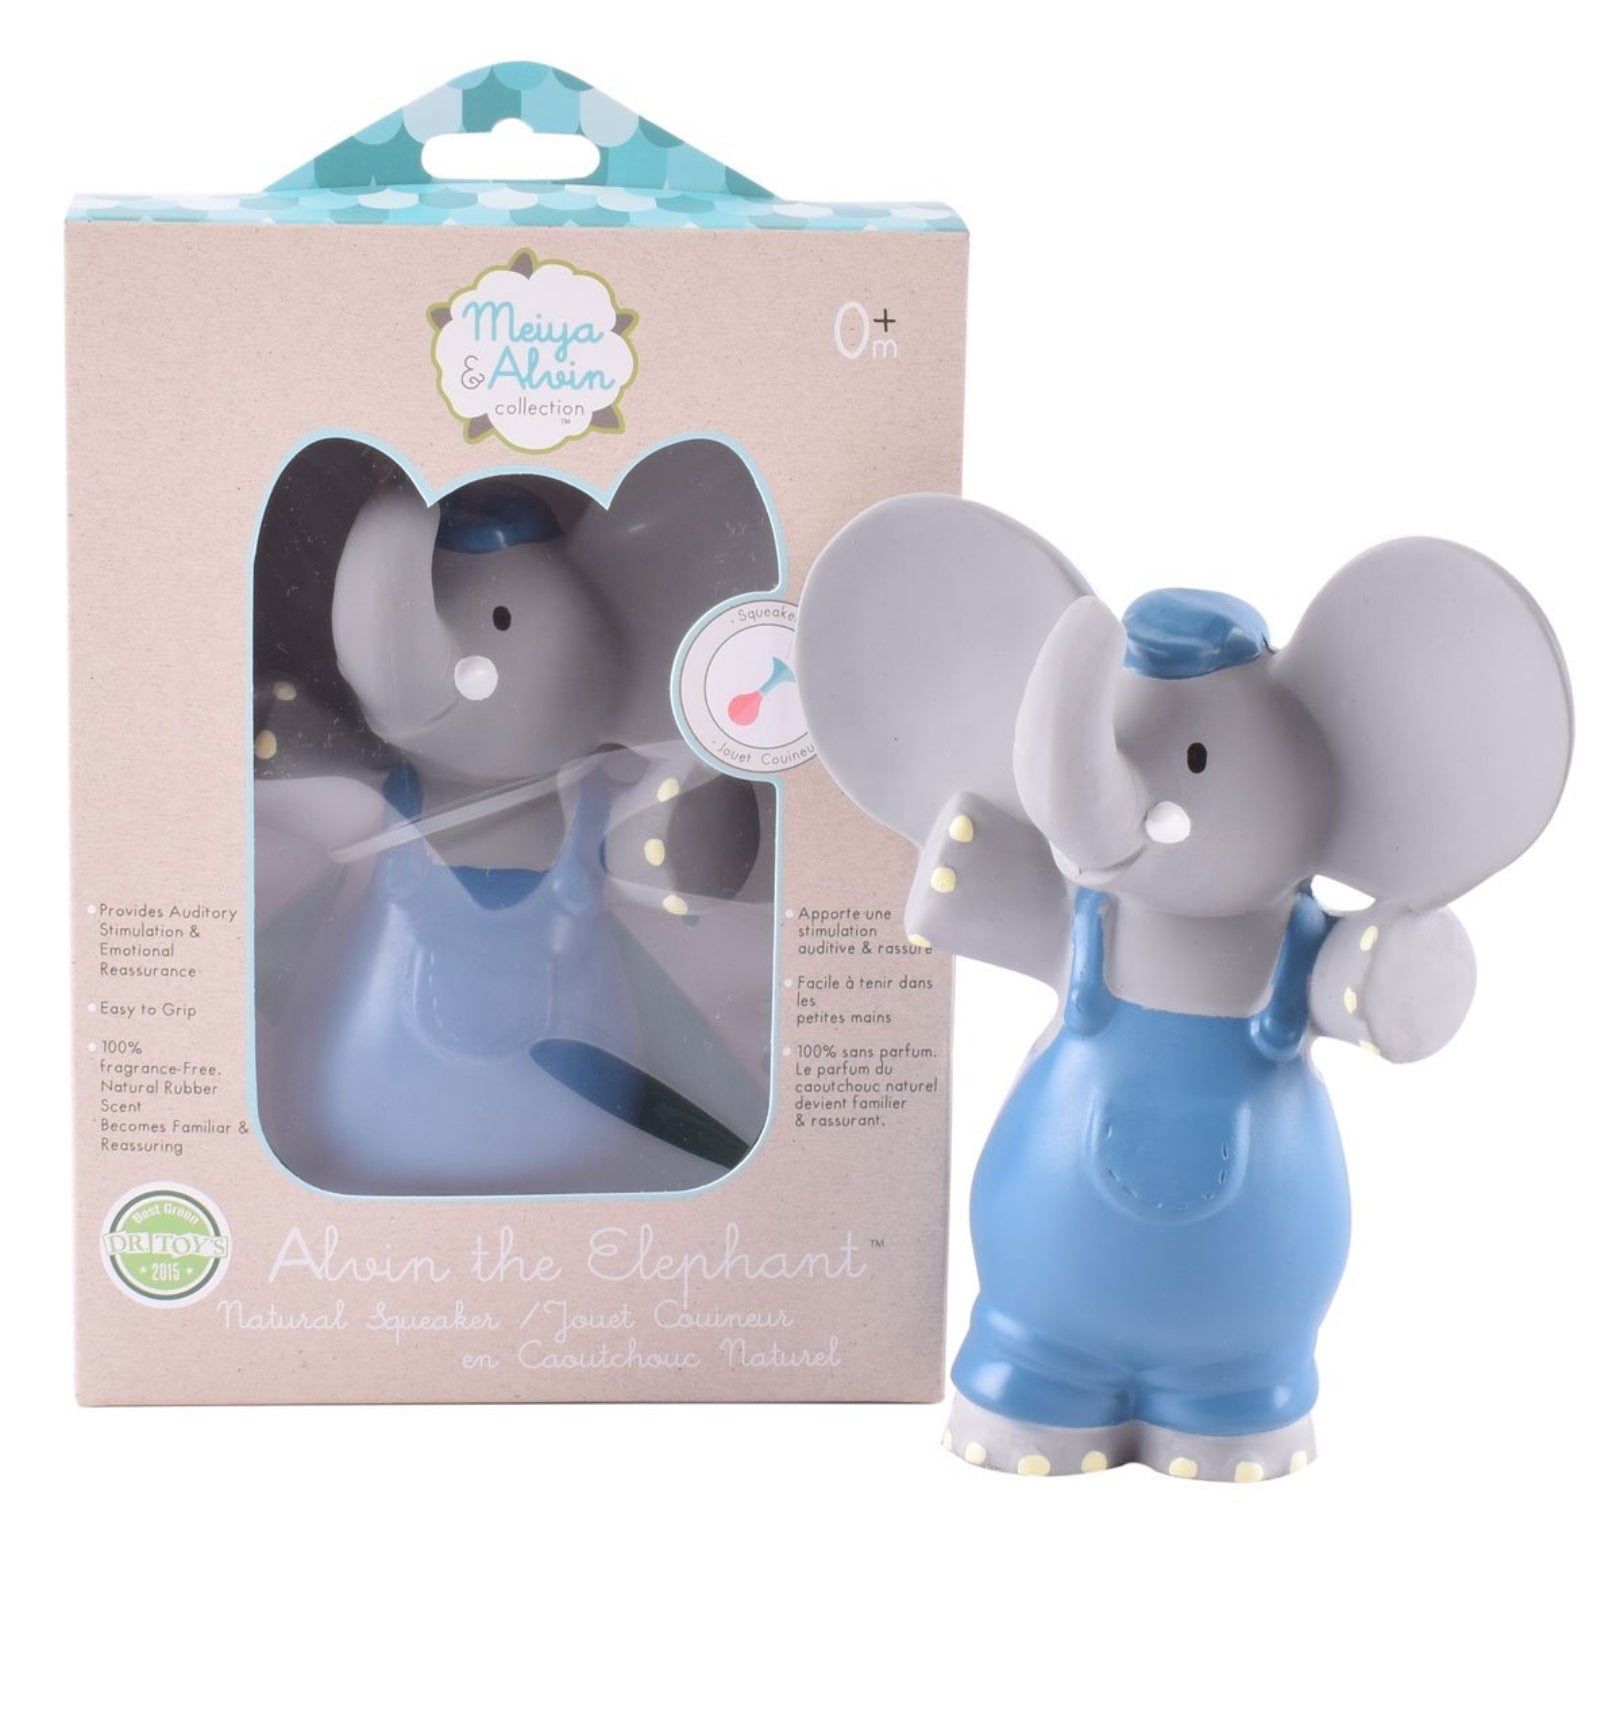 Alvin The Elephant Rubber Baby Teether Squeaker in a Gift Box